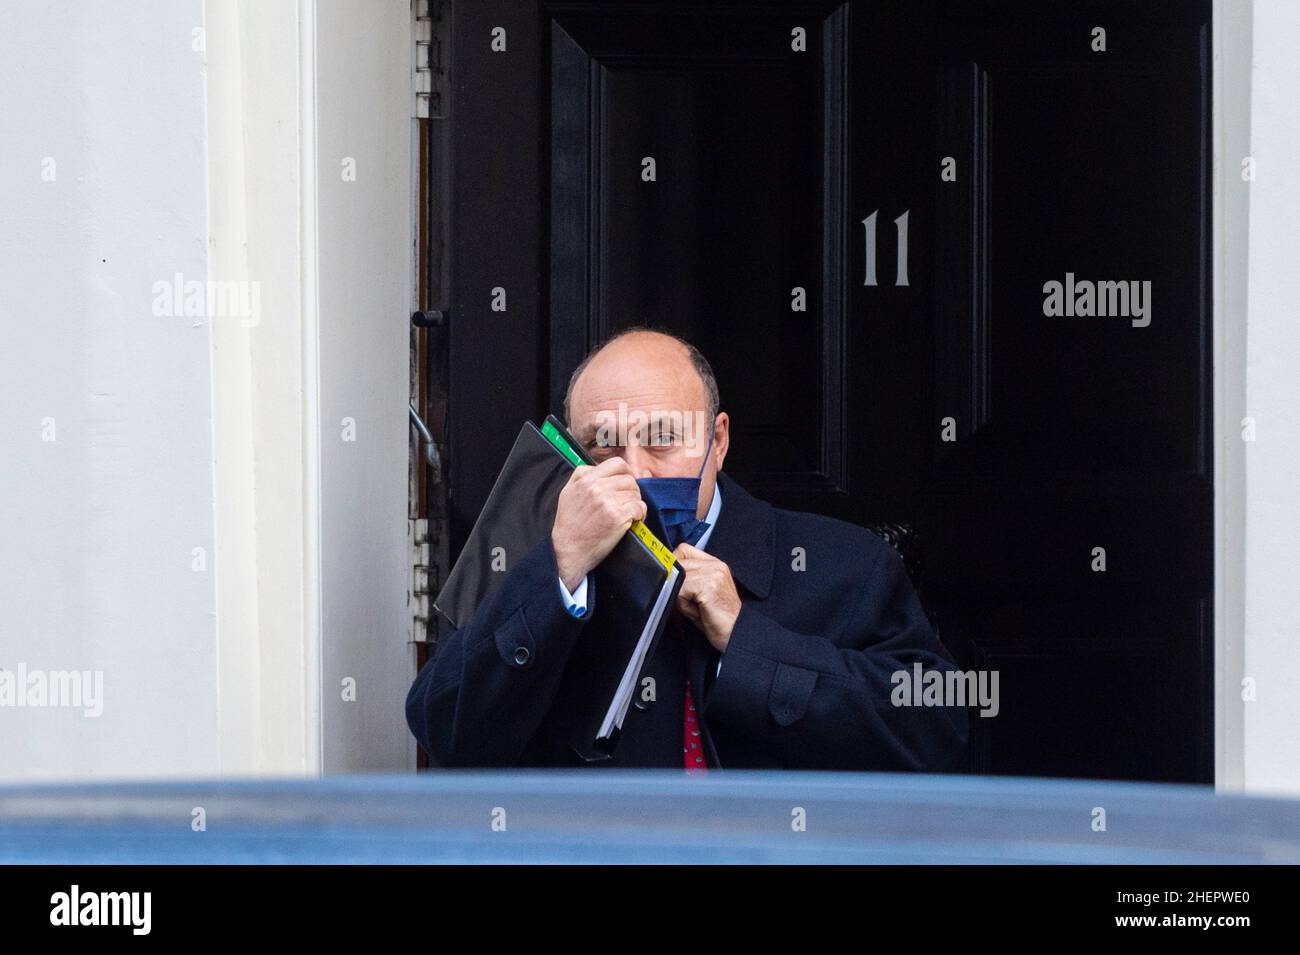 London, UK.  12 January 2022.  Andrew Griffith MP, Chief Business Adviser to the Prime Minister, at the door of Number 11 Downing Street ahead of Boris Johnson, Prime Minister departing for Prime Minister’s Questions (PMQs) at the House of Commons.  The Prime Minister is under pressure from MPs to respond to questions relating to a party on 20 May 2020 in the gardens of 10 Downing Street, at a time when UK lockdown restrictions banned social gatherings.    Credit: Stephen Chung / Alamy Live News Stock Photo